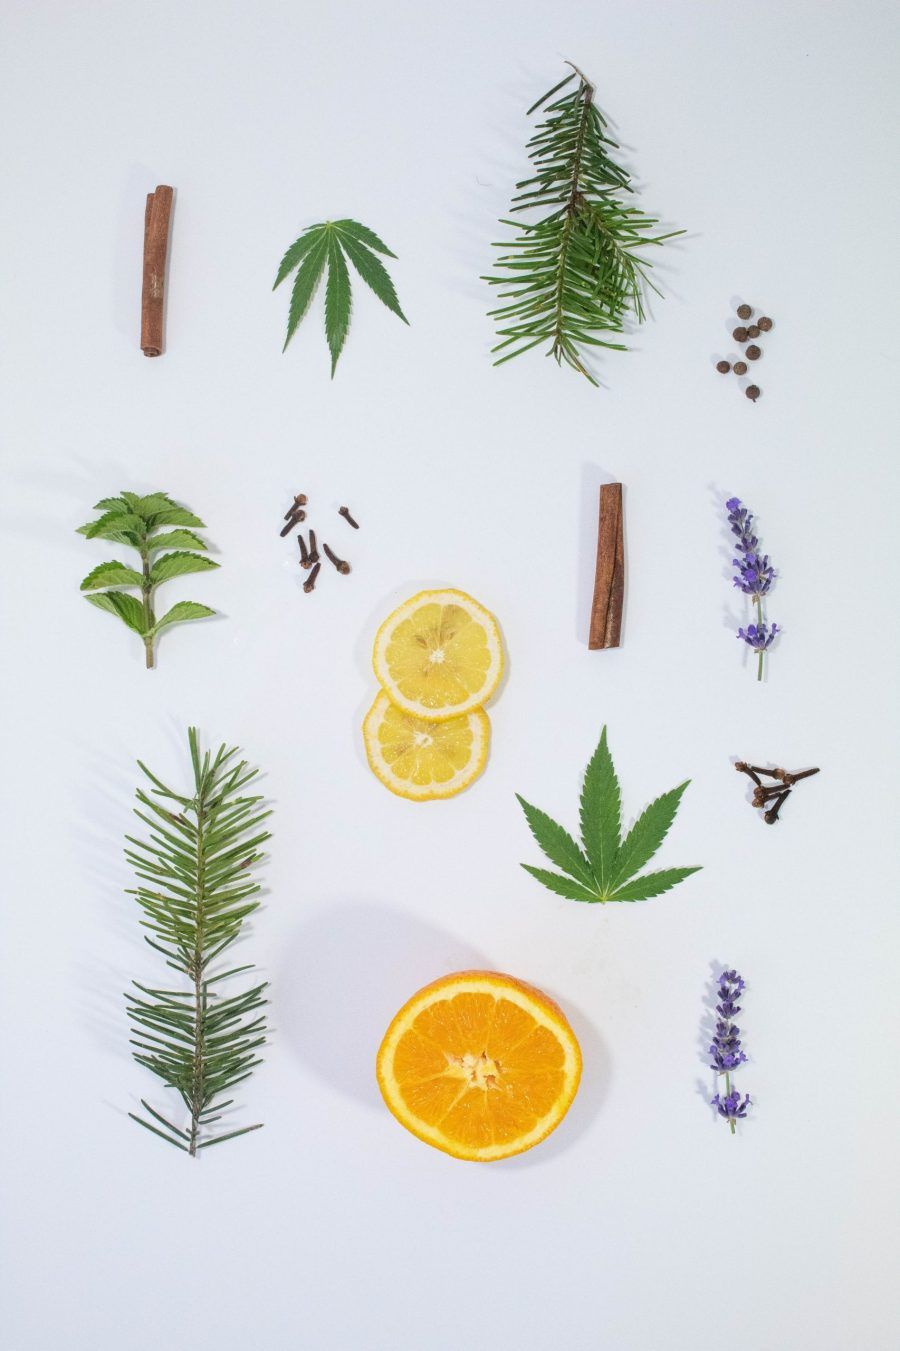 A variety of botanical clippings are arranged on a white background